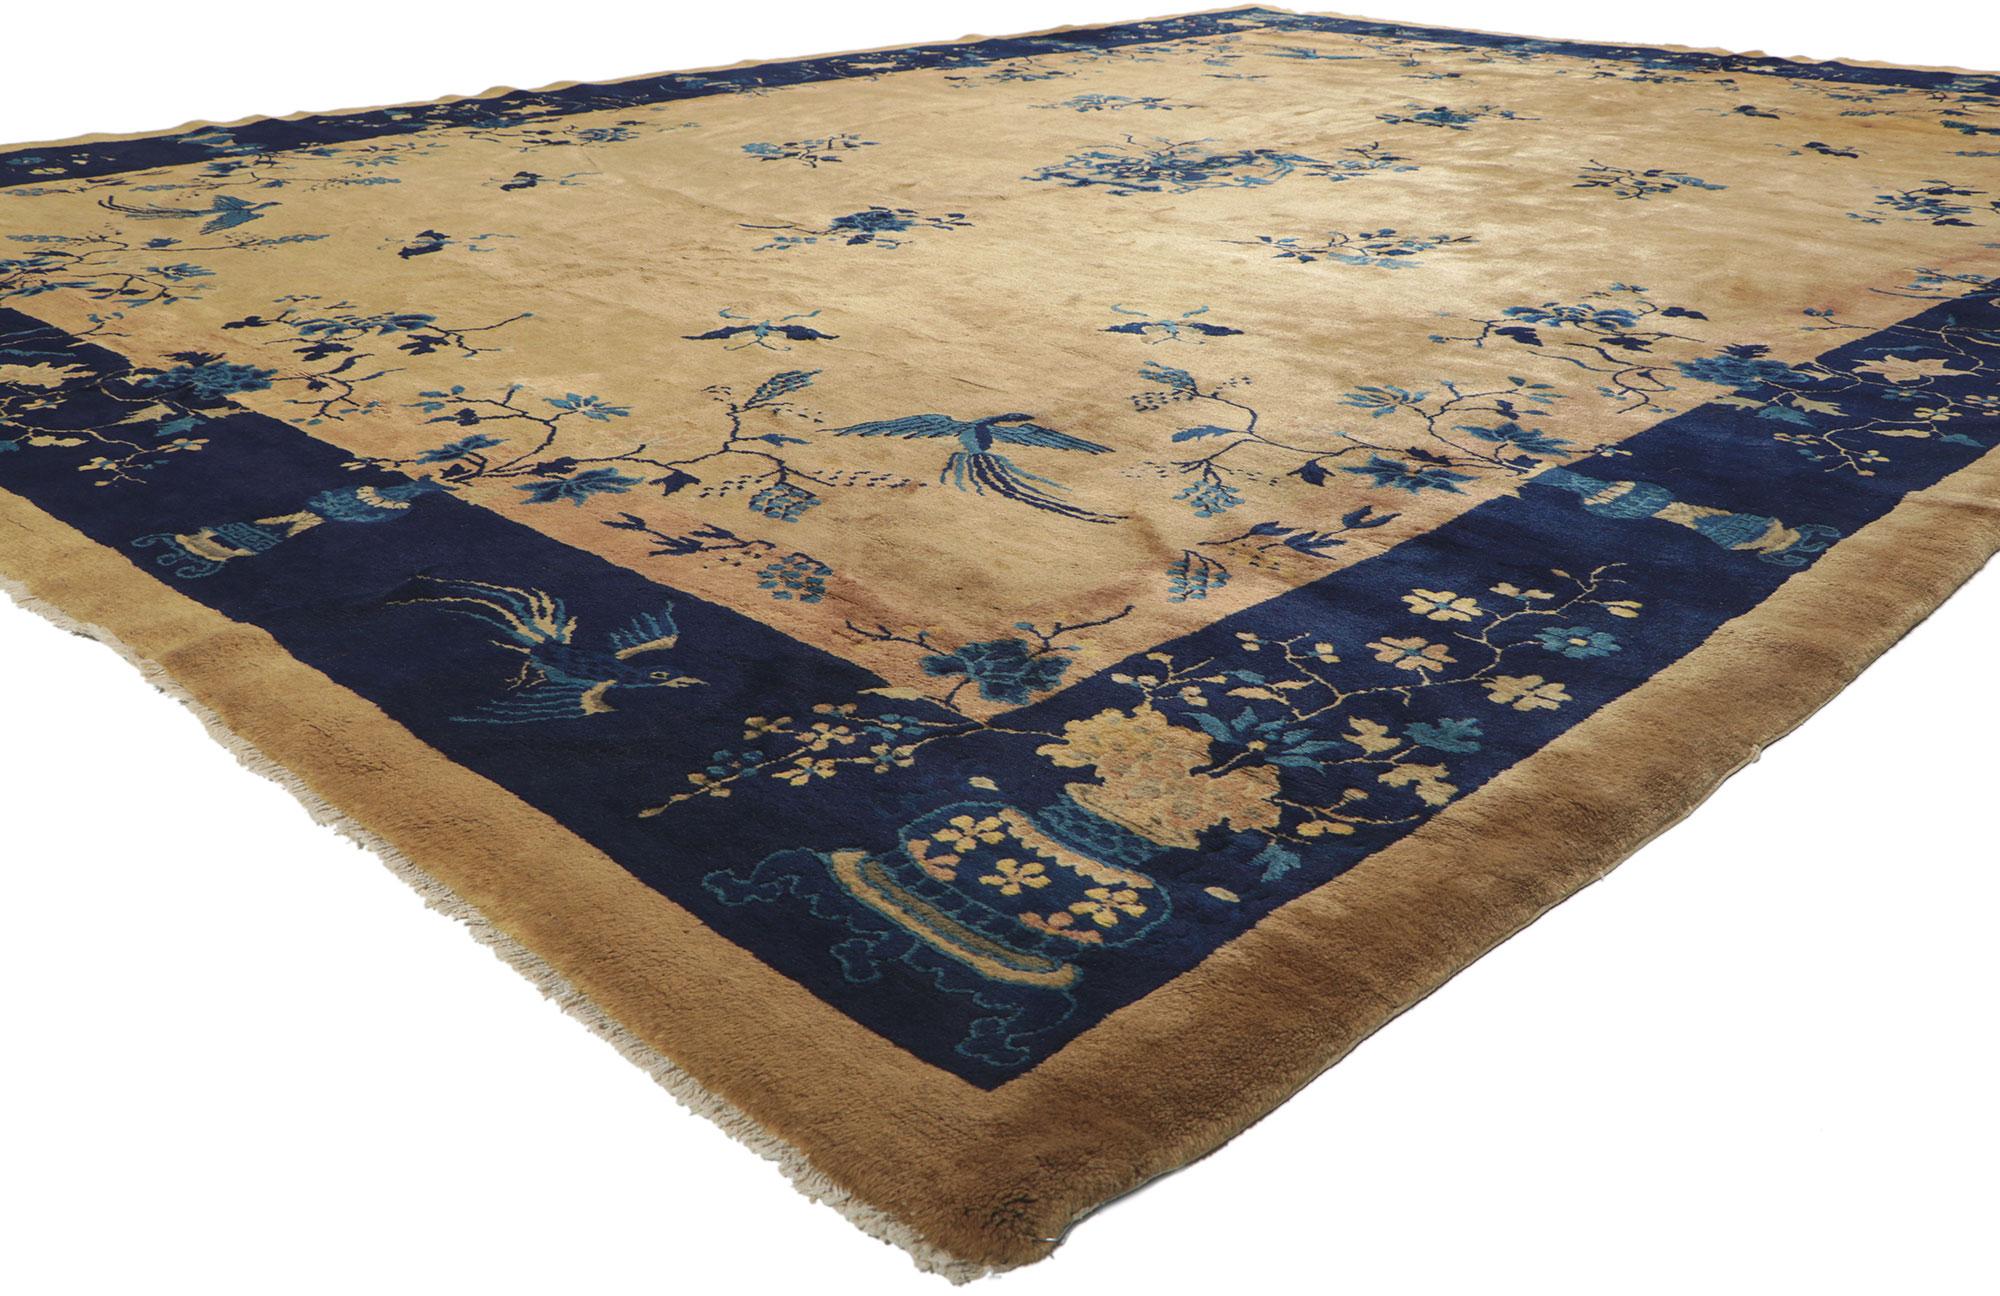 72180 Late 19th Century Antique Chinese Peking Rug with Chinoiserie Style 11'00 x 14'05. This gorgeous antique Peking rug features a complex yet traditional design that spreads across this lavish yet stately composition. A simplistic design unfolds